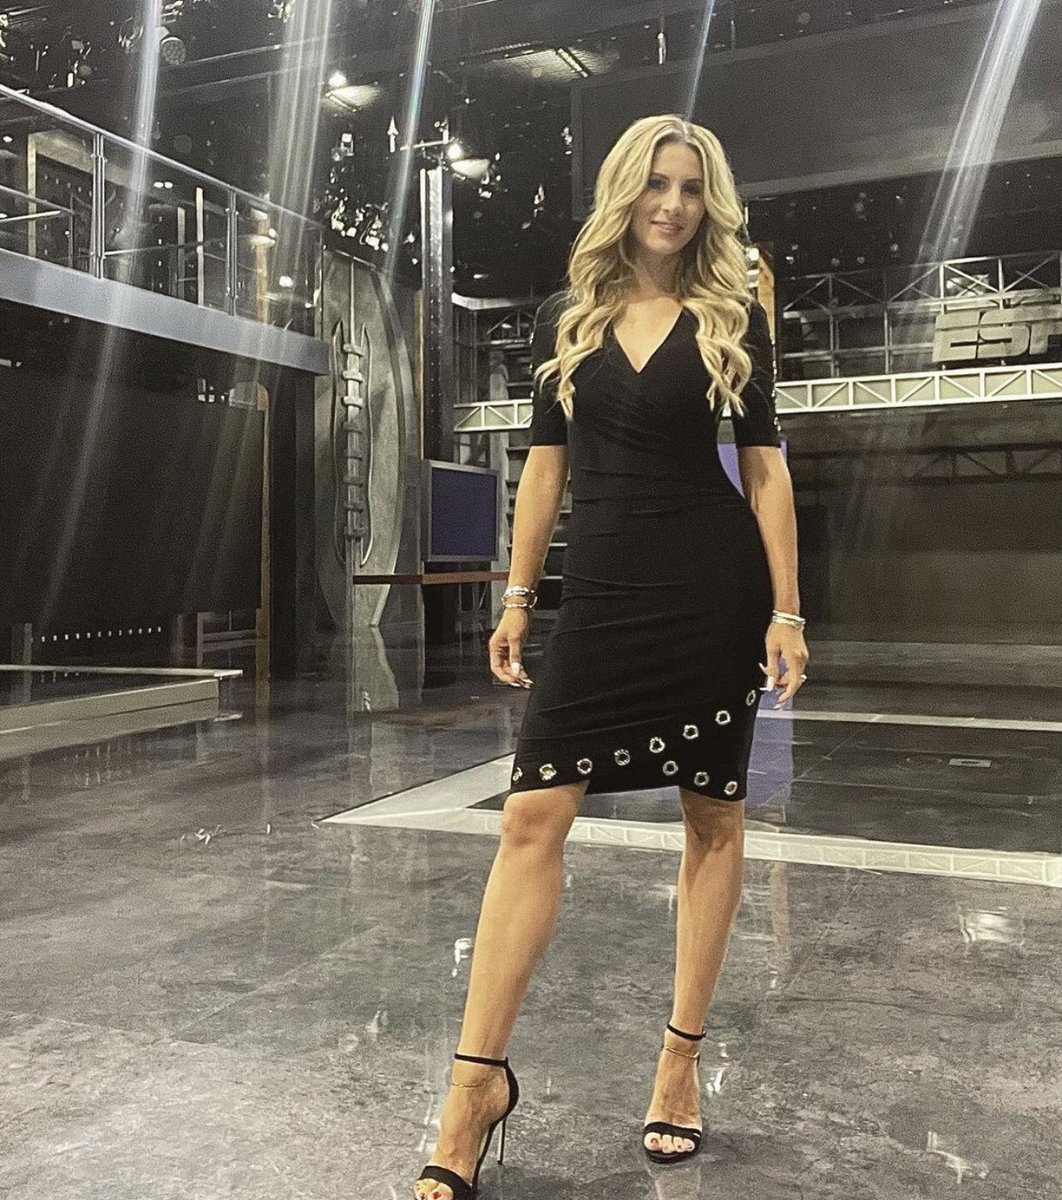 Laura Rutledge has some of the best legs in sports.